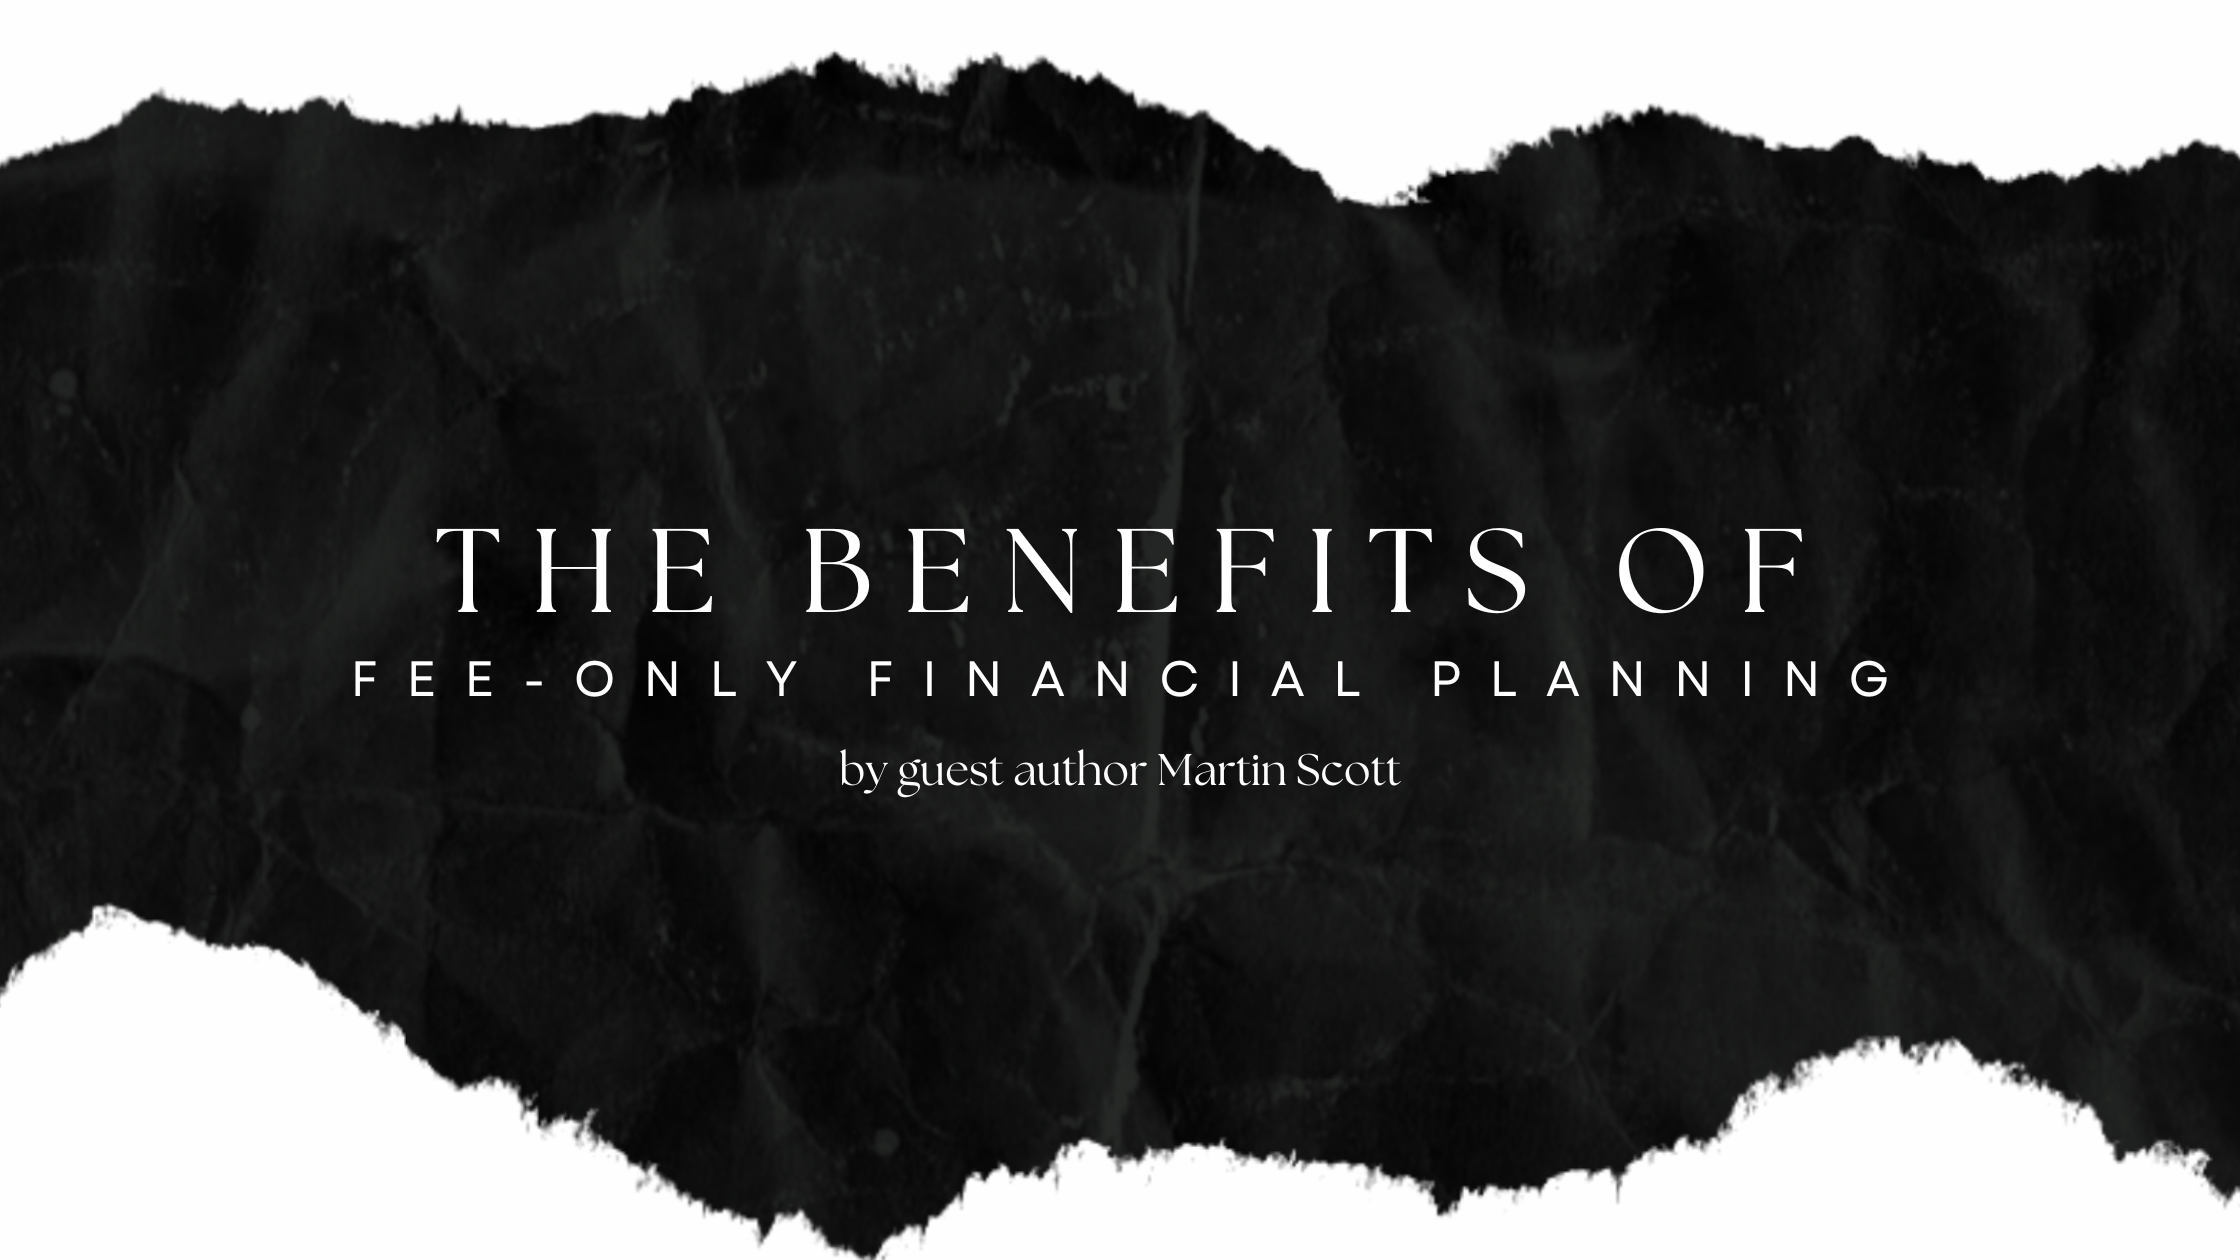 What is Fee-Only Financial Planning and Why is it a Good Idea?